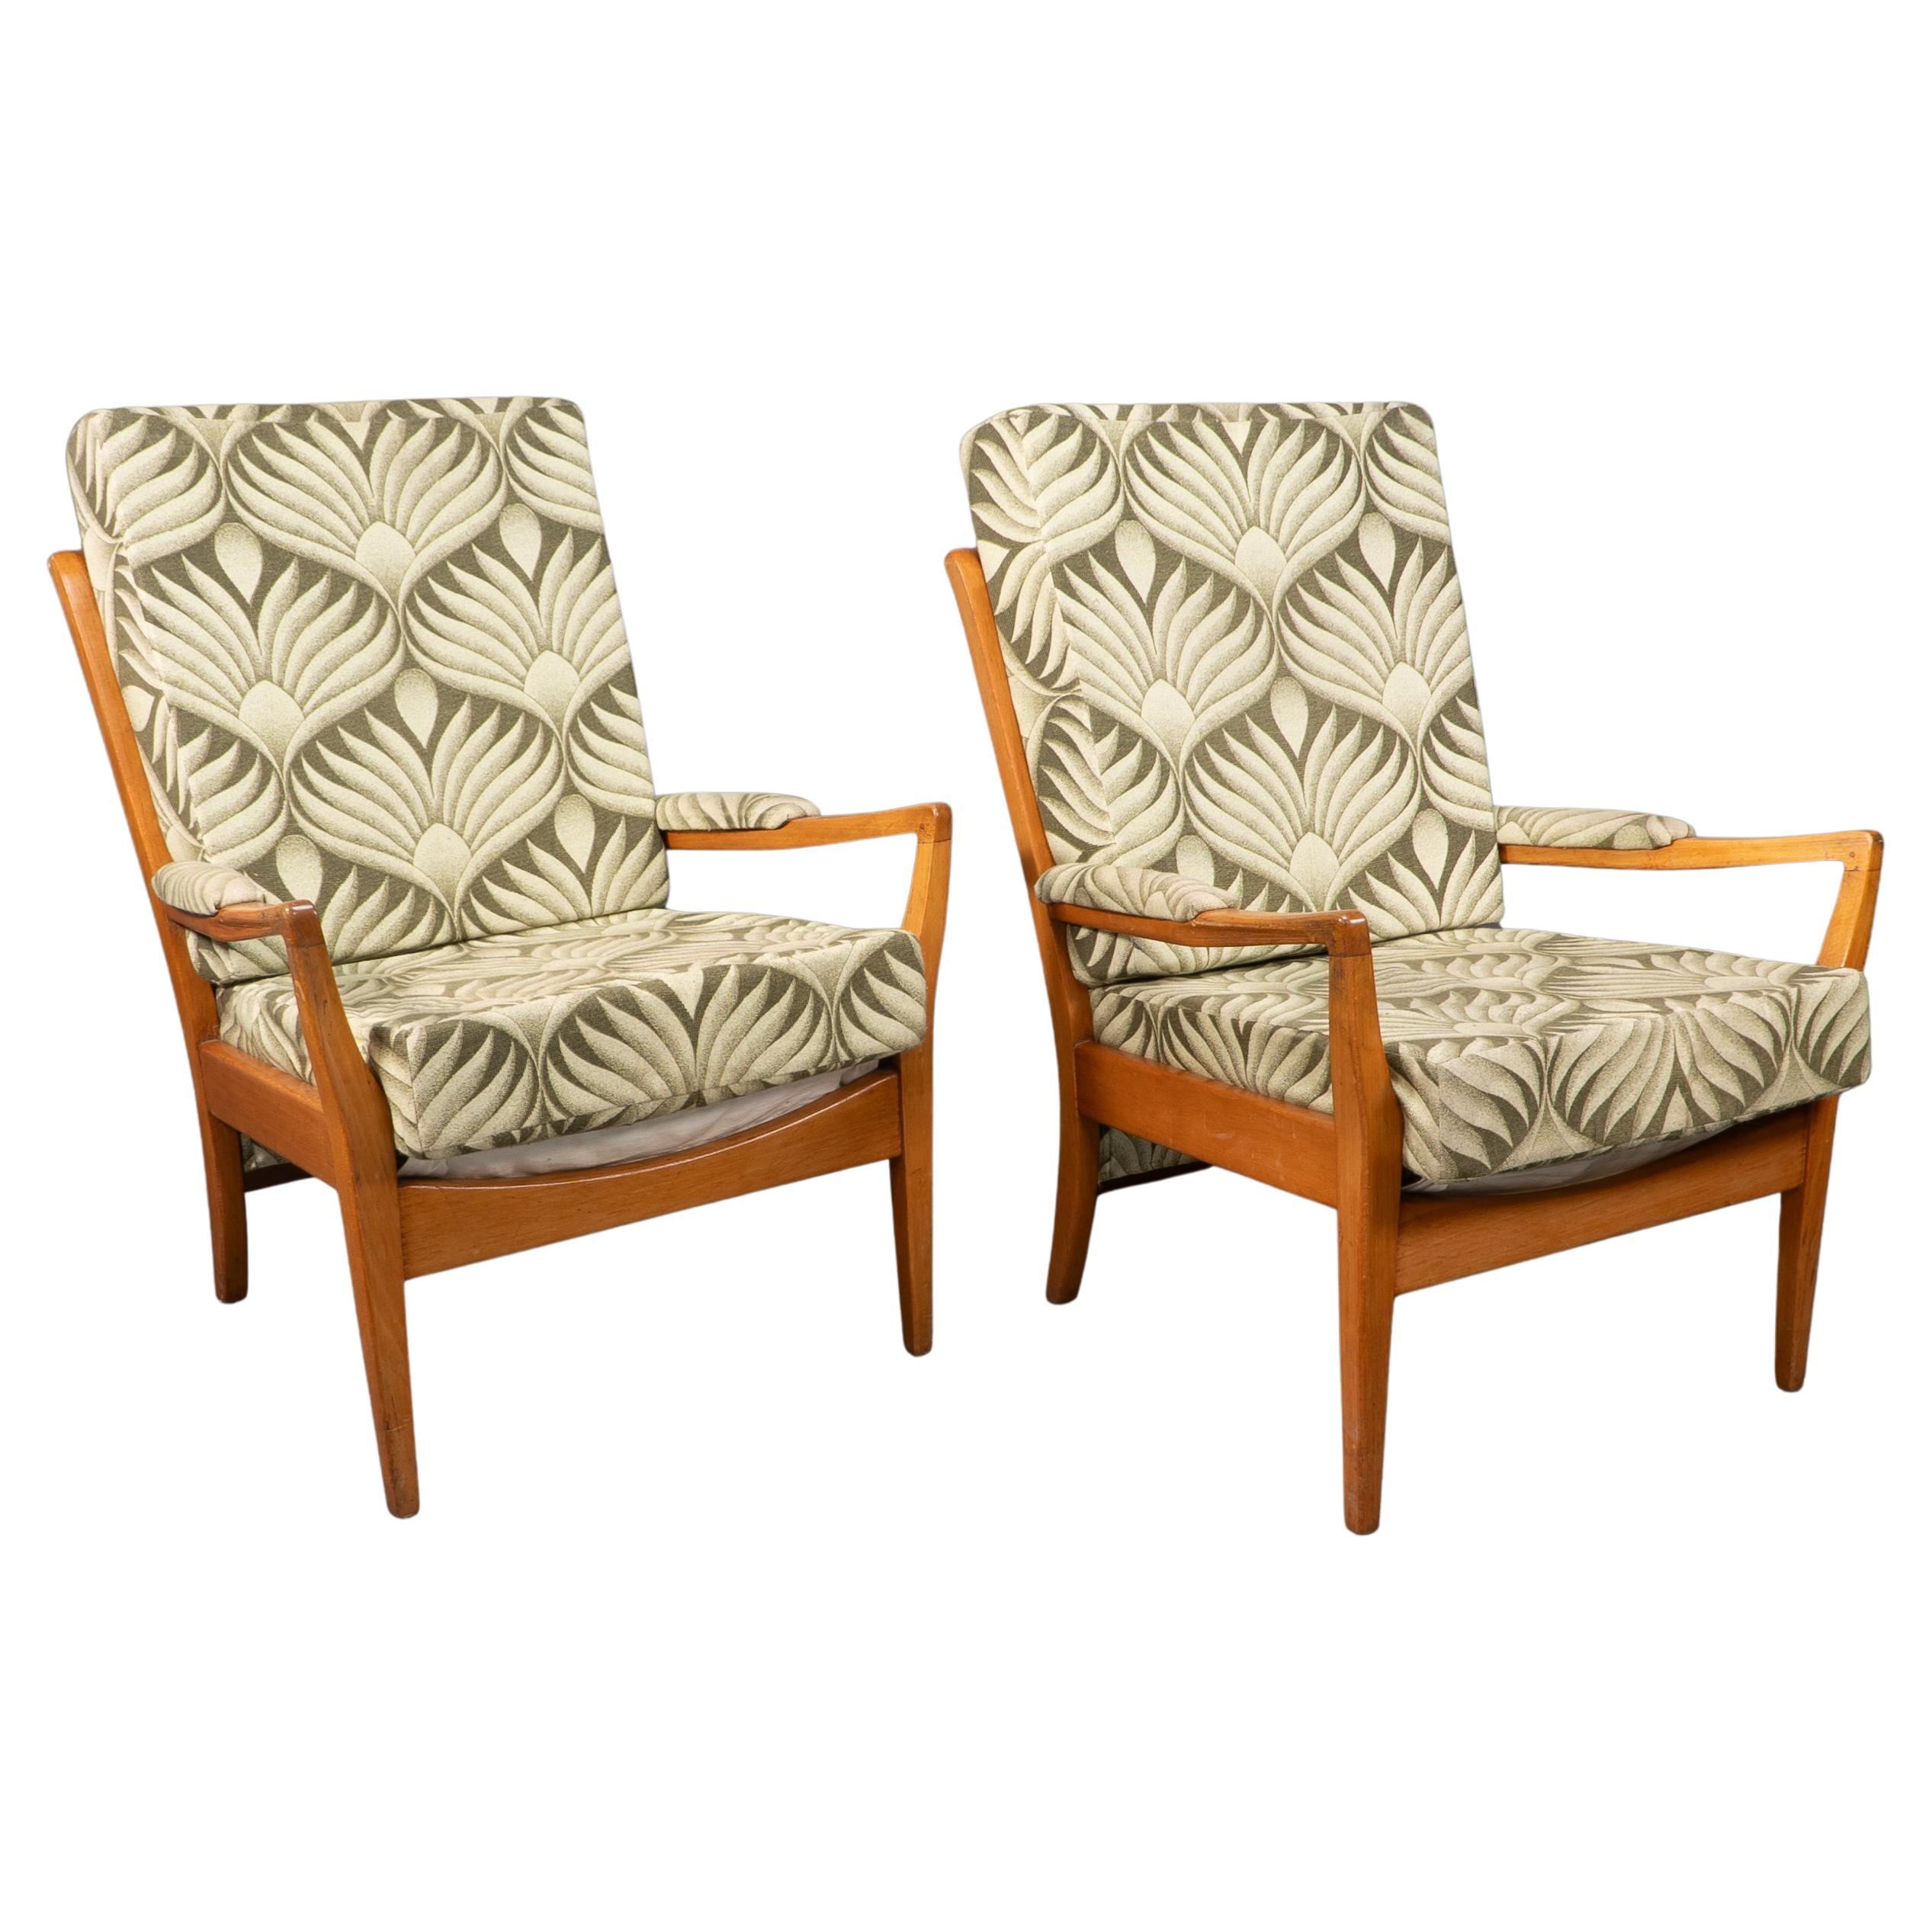 A pair of Mid-Century beech armchairs with outswept arms